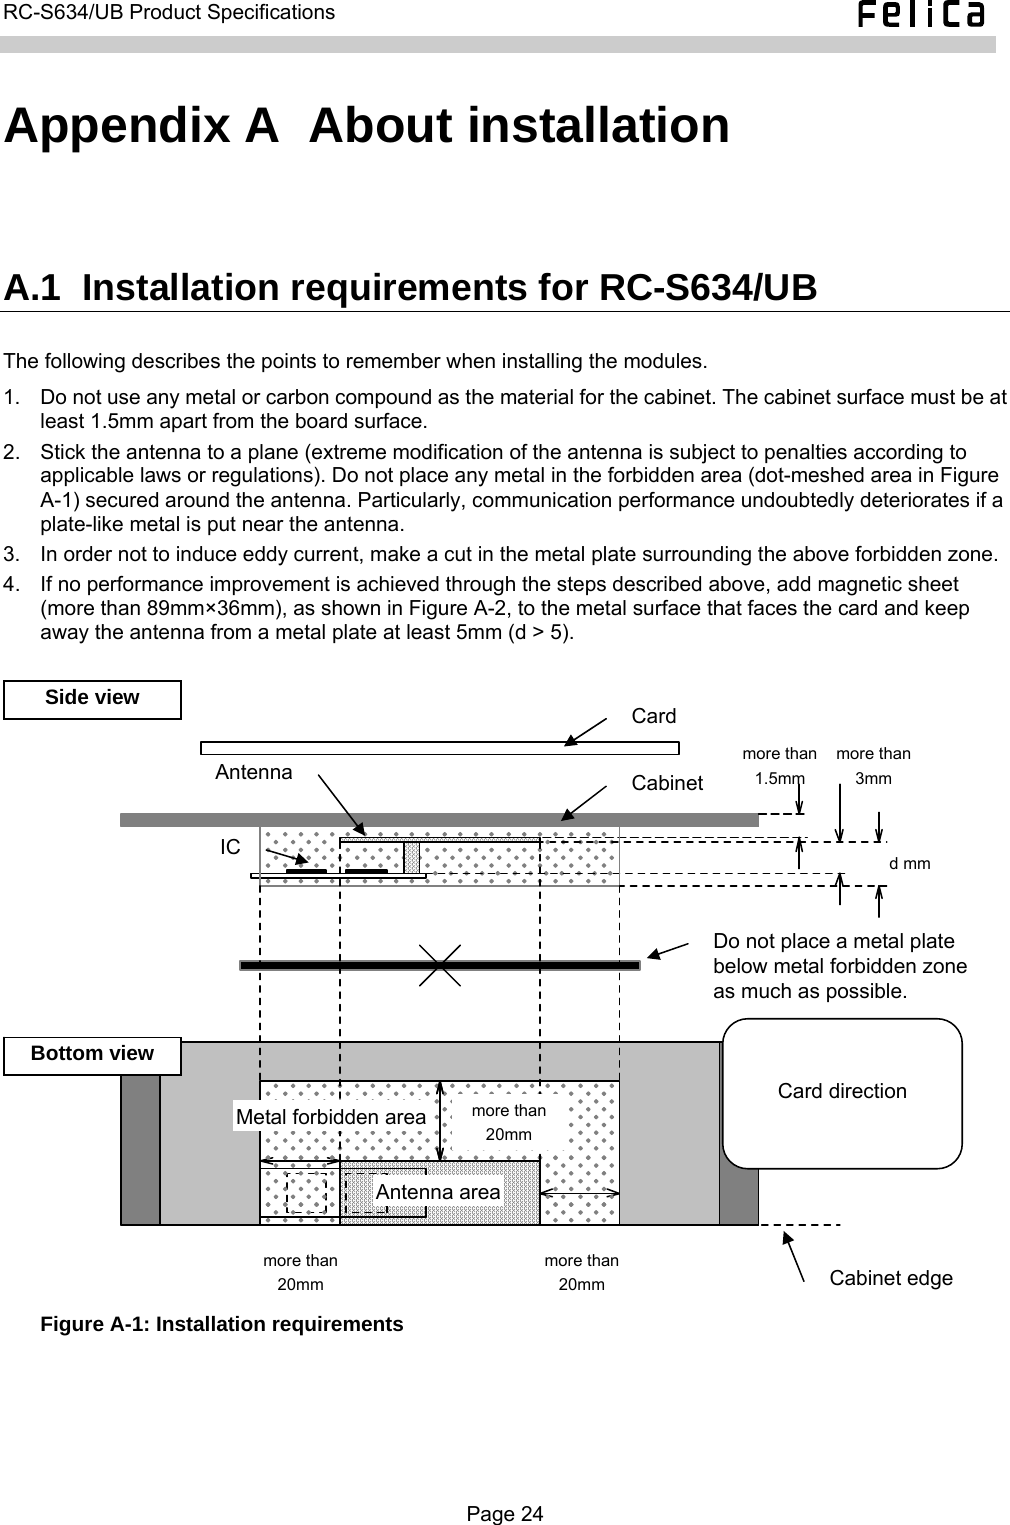   RC-S634/UB Product Specifications  Appendix A  About installation A.1  Installation requirements for RC-S634/UB The following describes the points to remember when installing the modules. 1.  Do not use any metal or carbon compound as the material for the cabinet. The cabinet surface must be at least 1.5mm apart from the board surface. 2.  Stick the antenna to a plane (extreme modification of the antenna is subject to penalties according to applicable laws or regulations). Do not place any metal in the forbidden area (dot-meshed area in Figure A-1) secured around the antenna. Particularly, communication performance undoubtedly deteriorates if a plate-like metal is put near the antenna. 3.  In order not to induce eddy current, make a cut in the metal plate surrounding the above forbidden zone. 4.  If no performance improvement is achieved through the steps described above, add magnetic sheet (more than 89mm×36mm), as shown in Figure A-2, to the metal surface that faces the card and keep away the antenna from a metal plate at least 5mm (d &gt; 5).  1.5mm  3mm more than Side view Bottom view Metal forbidden area more than 20mm more than 20mm Antenna areaCard direction more than Cabinet Cabinet edge IC more than 20mm d mm Do not place a metal plate below metal forbidden zoneas much as possible. Antenna Card  Figure A-1: Installation requirements  Page 24  